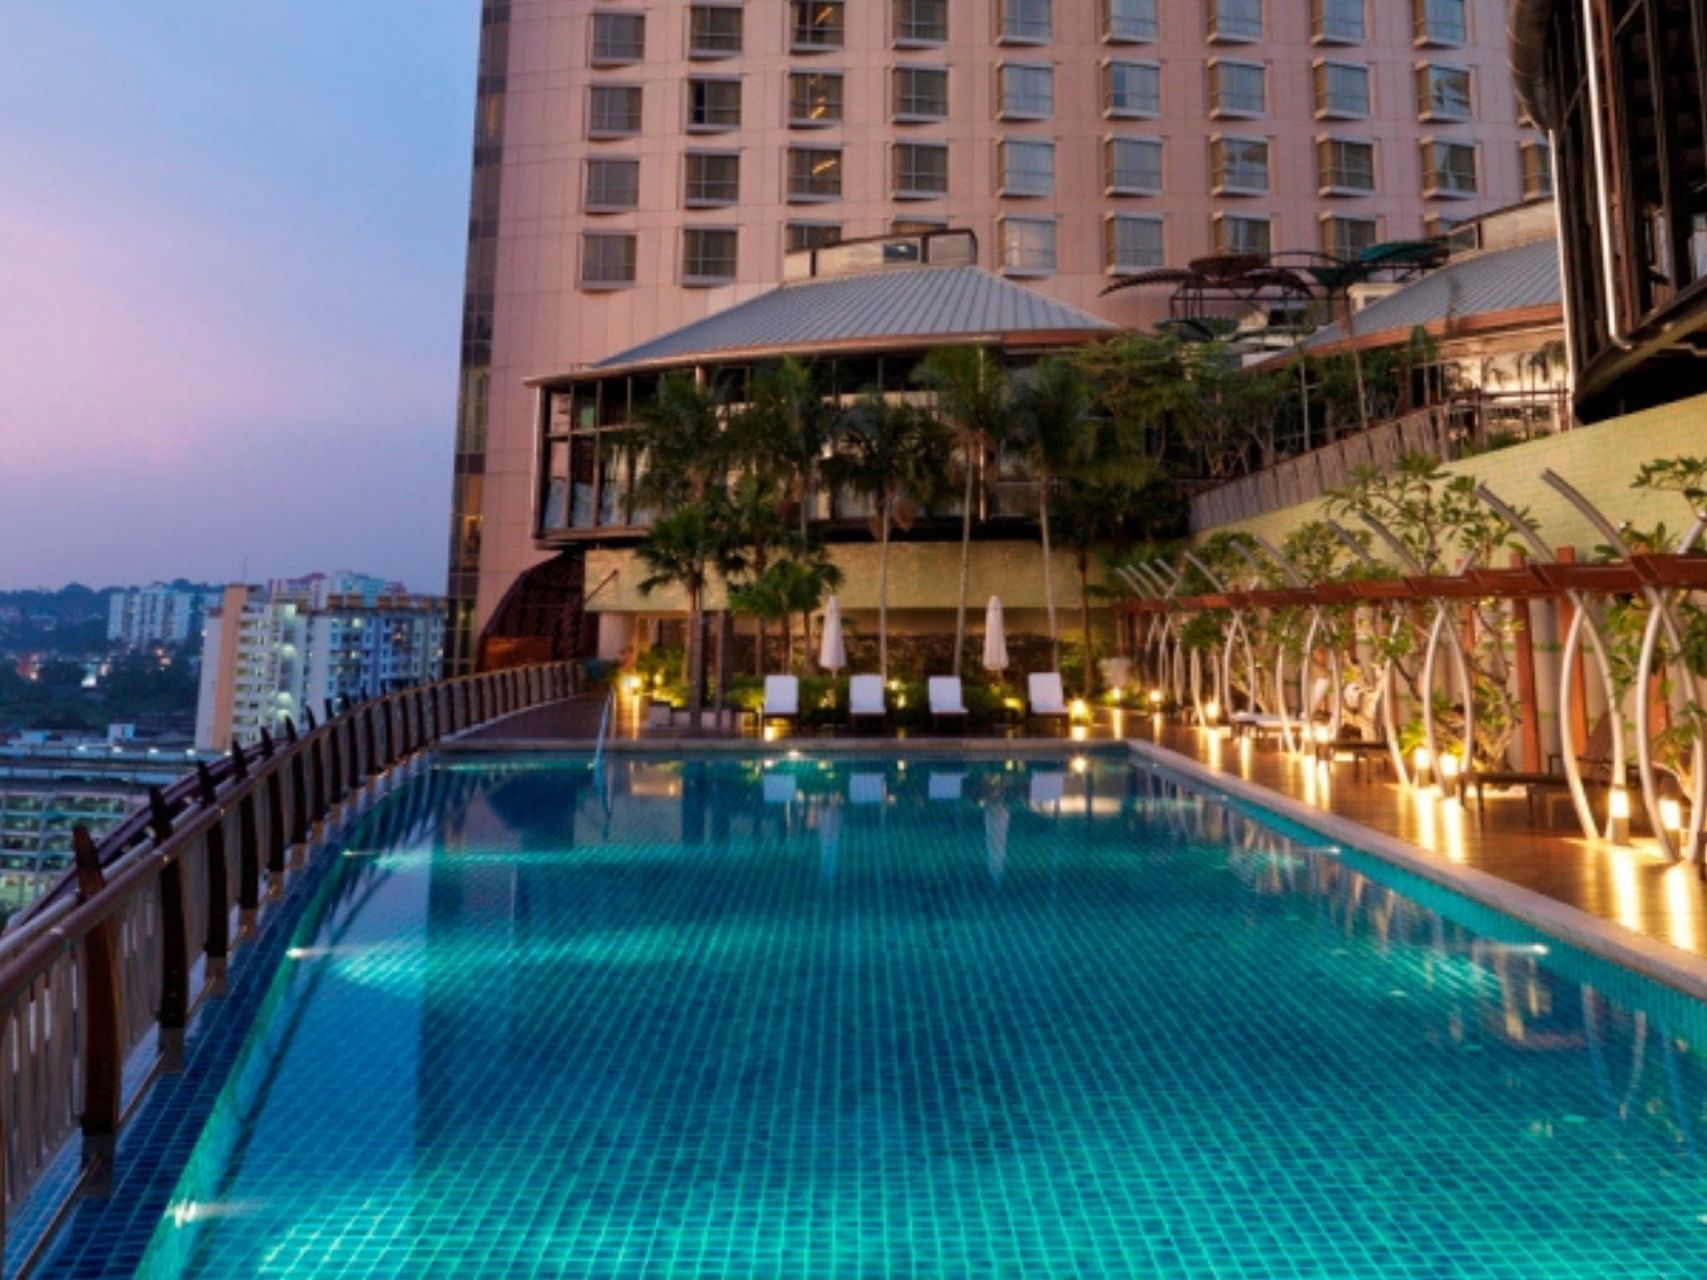 The splendid pool on the rooftop in Gardens hotels & residences